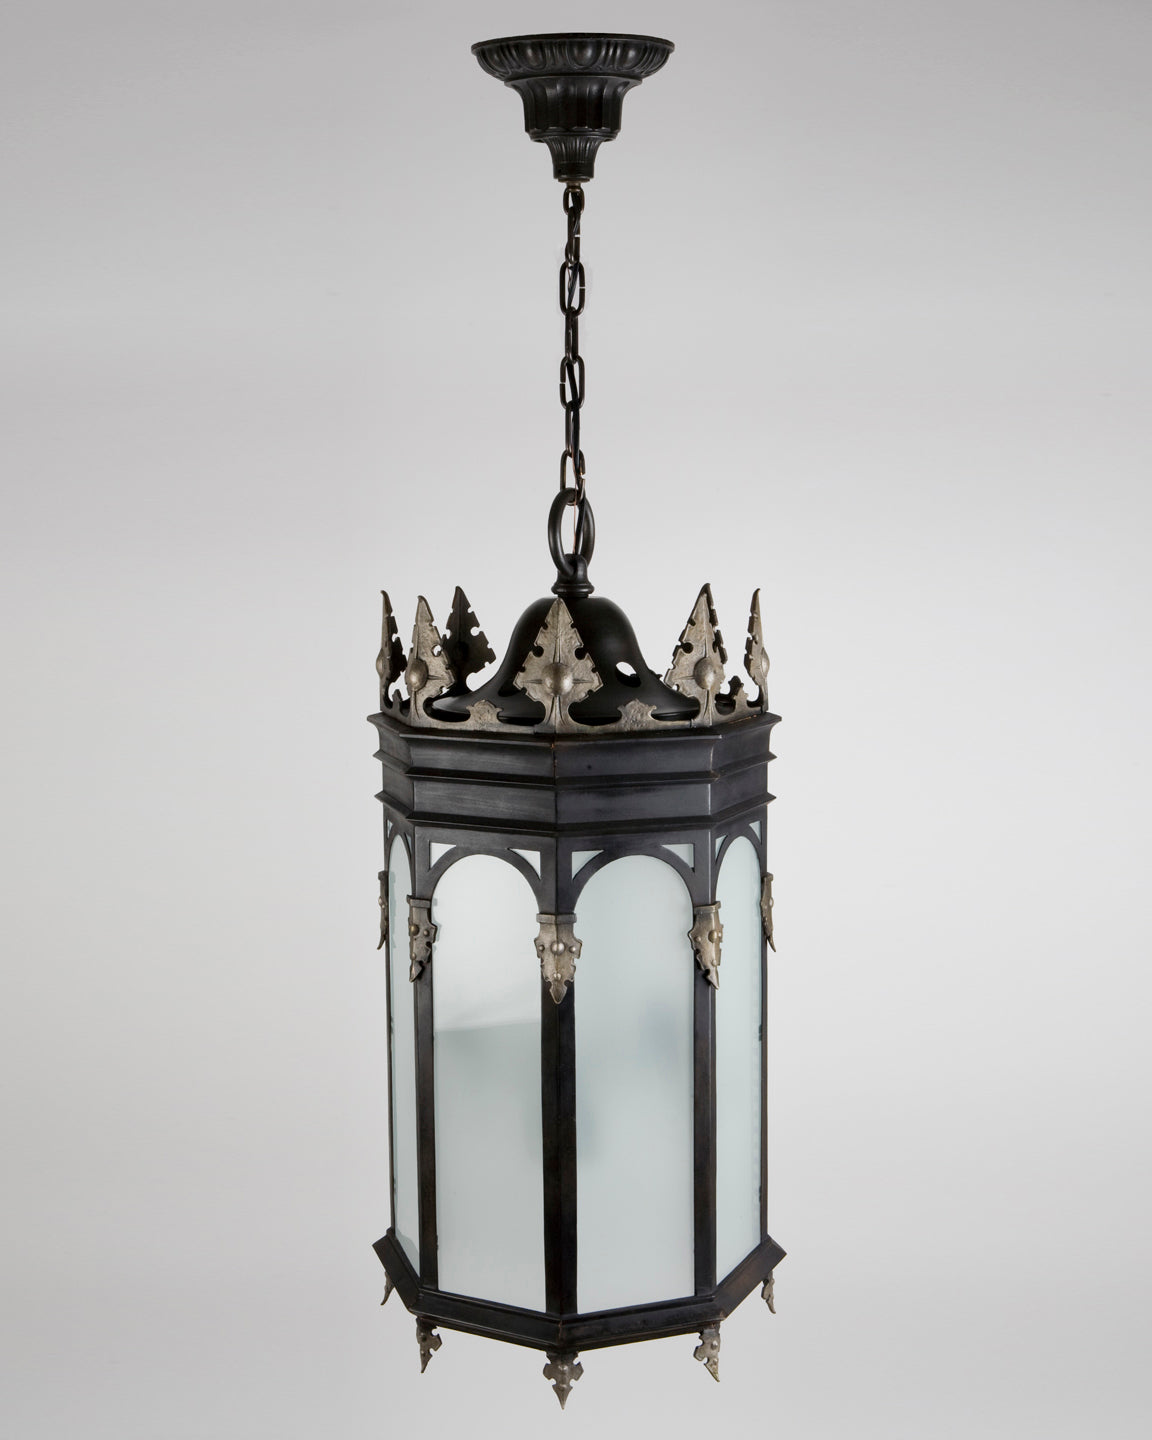 Wrought Iron and Brass Gothic Revival Lantern